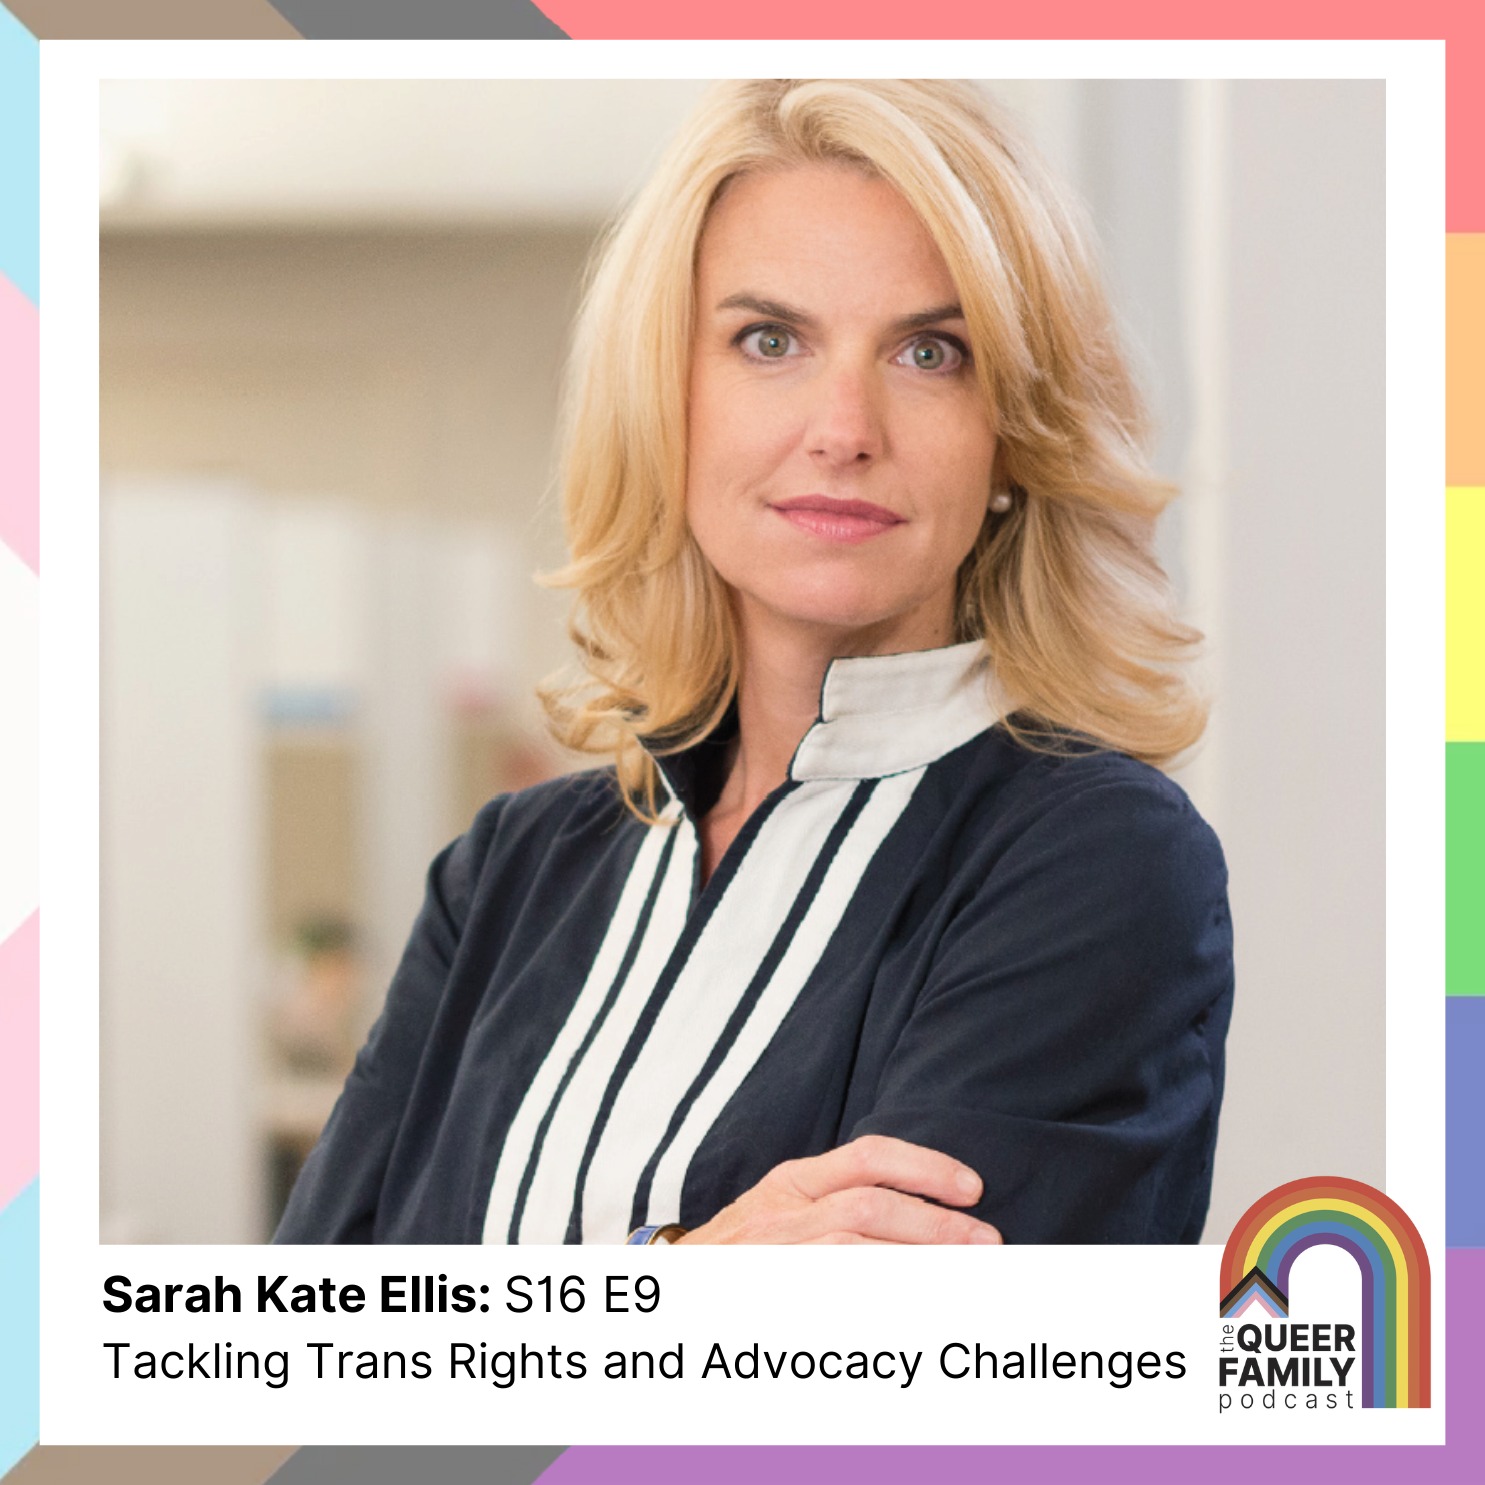 Sarah Kate Ellis: Tackling Trans Rights and Advocacy Challenges